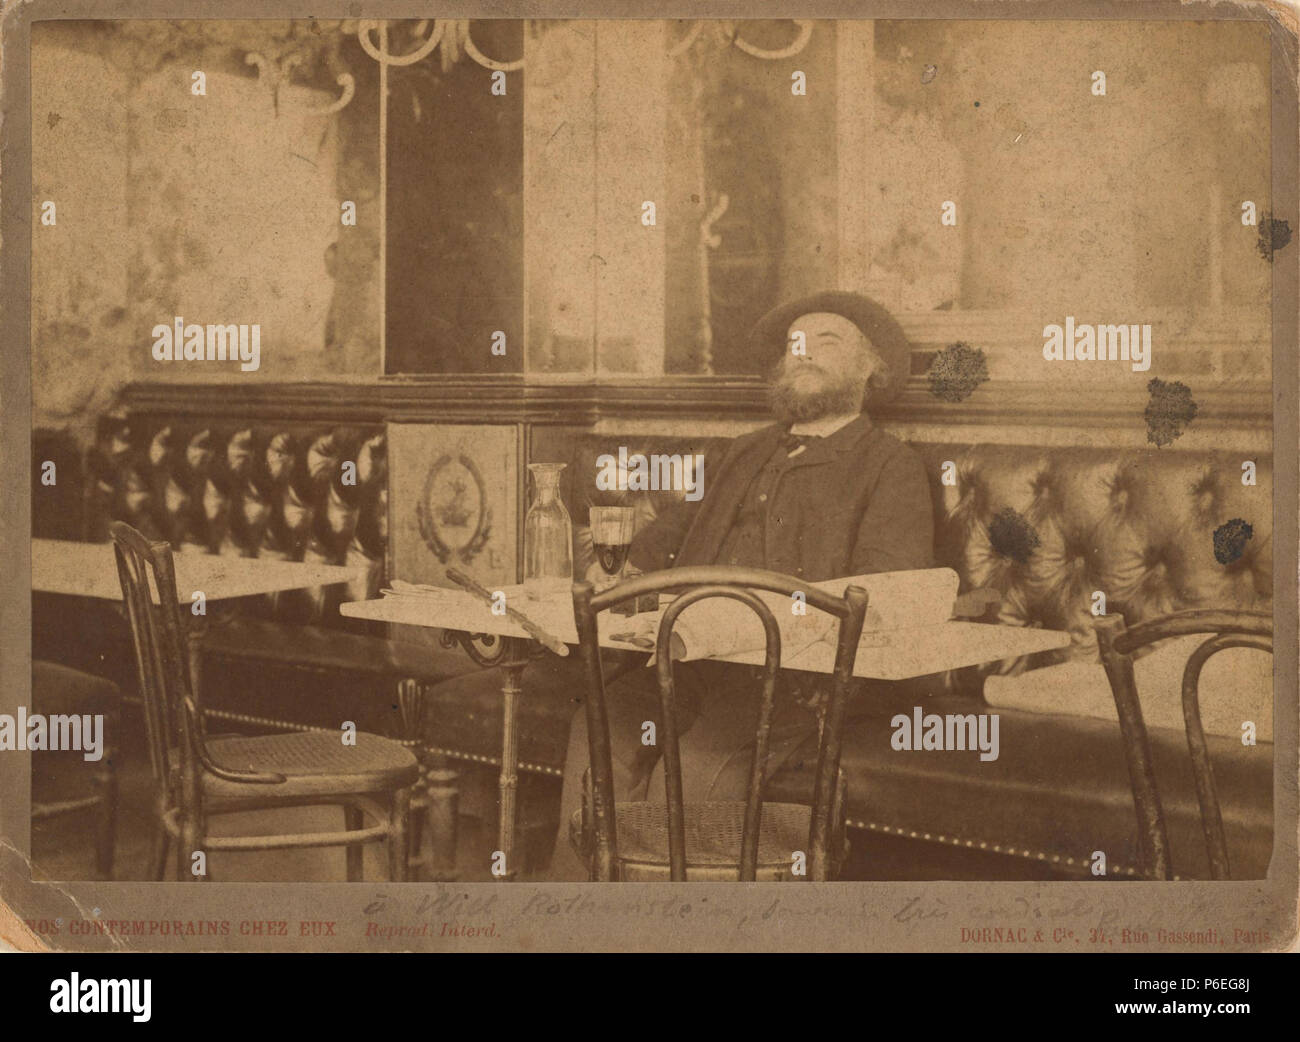 English: Photograph of French poet Paul Verlaine (1844-1896), seated at a table in the Café François Ier, Paris, 1892. Photographed by Dornac. MS Eng 1148 (1749), Houghton Library, Harvard University . 28 May 1892 53 Houghton MS Eng 1148 (1749) - Paul Verlaine Stock Photo